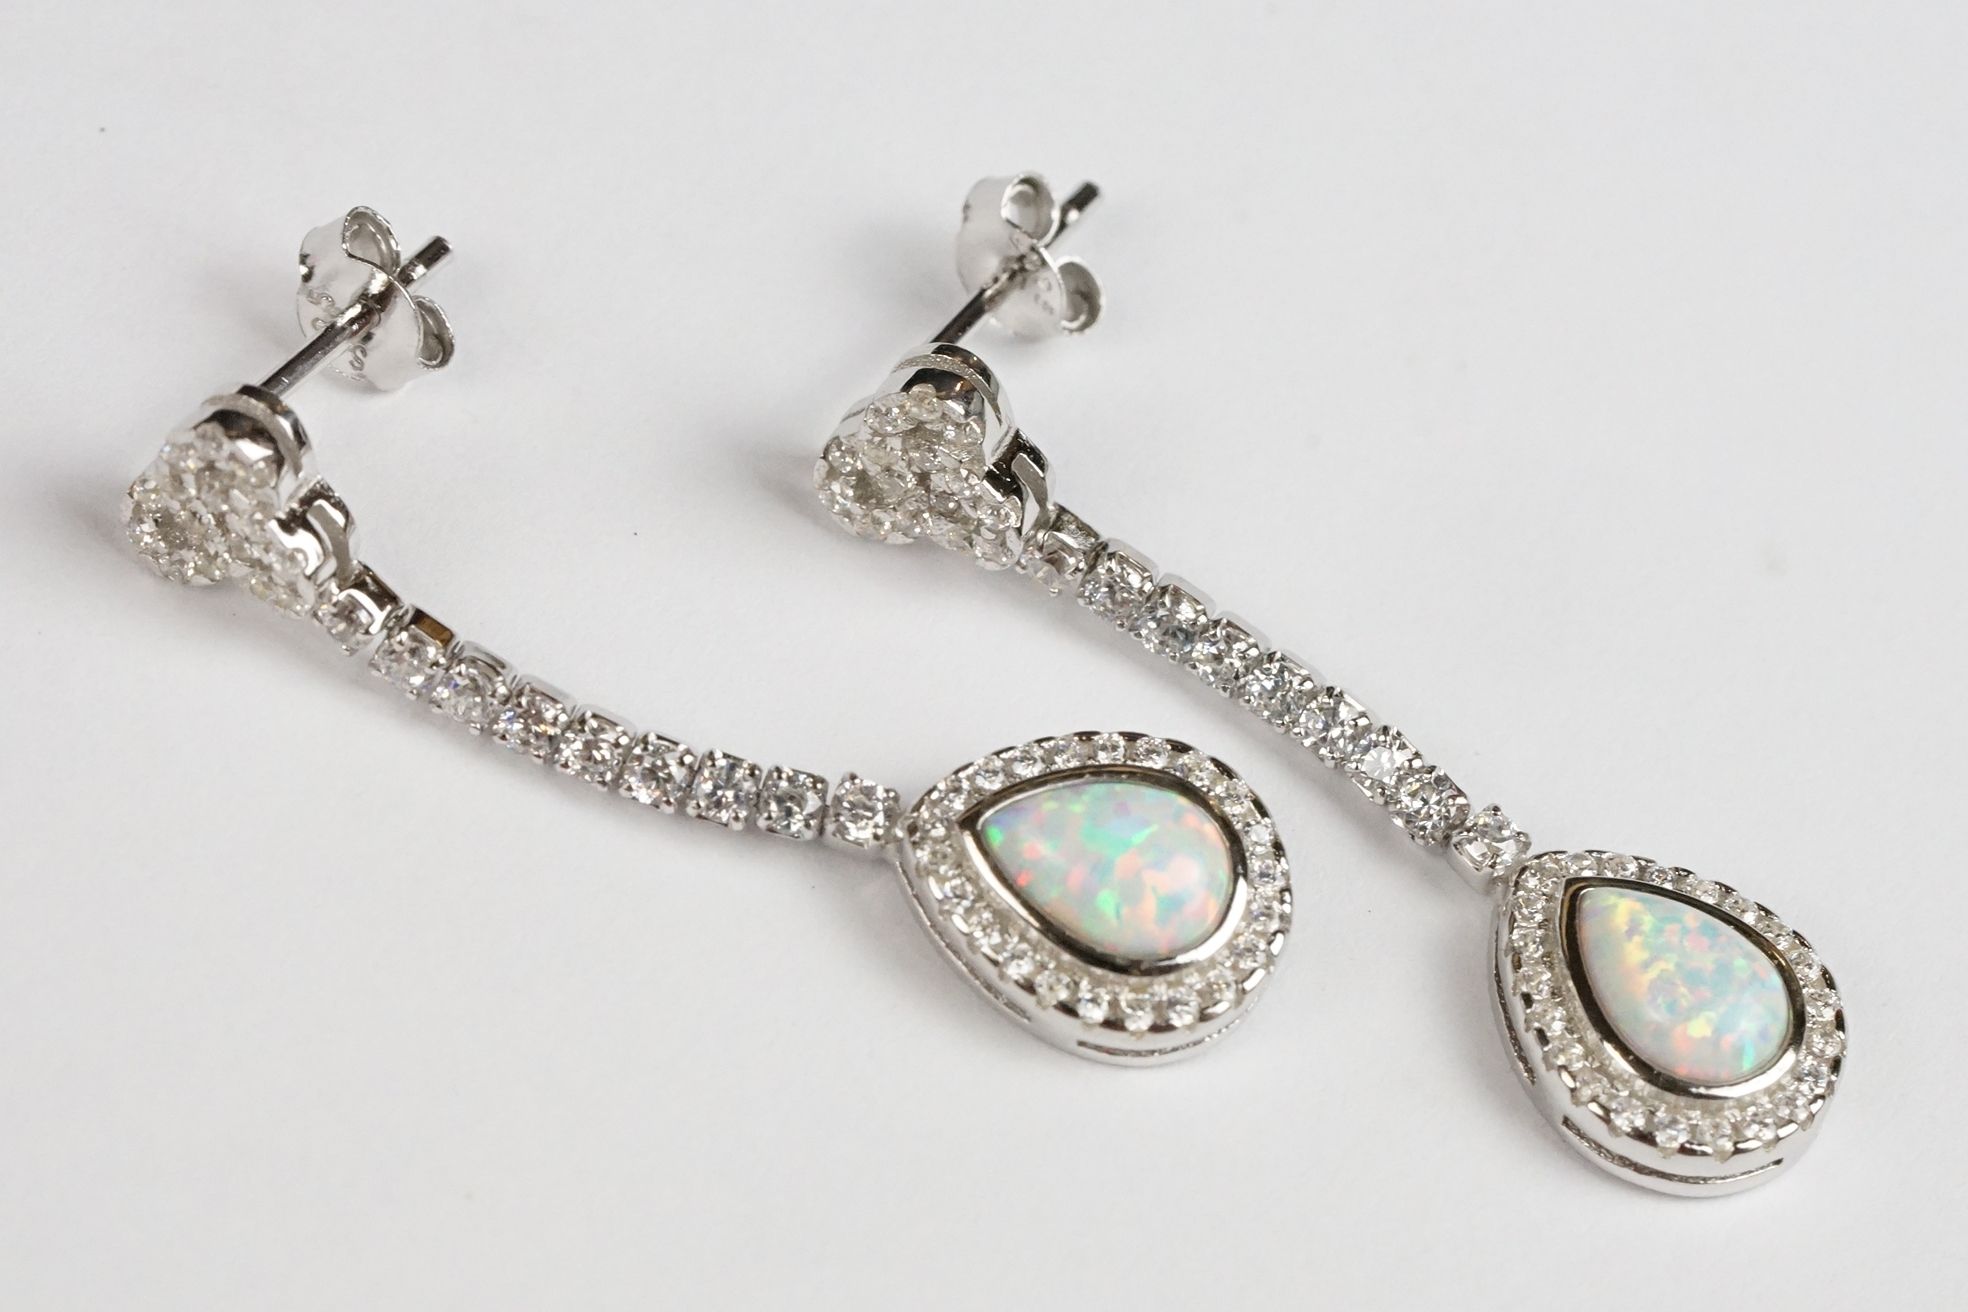 Pair of Silver CZ and Opal Drop Earrings - Image 3 of 4